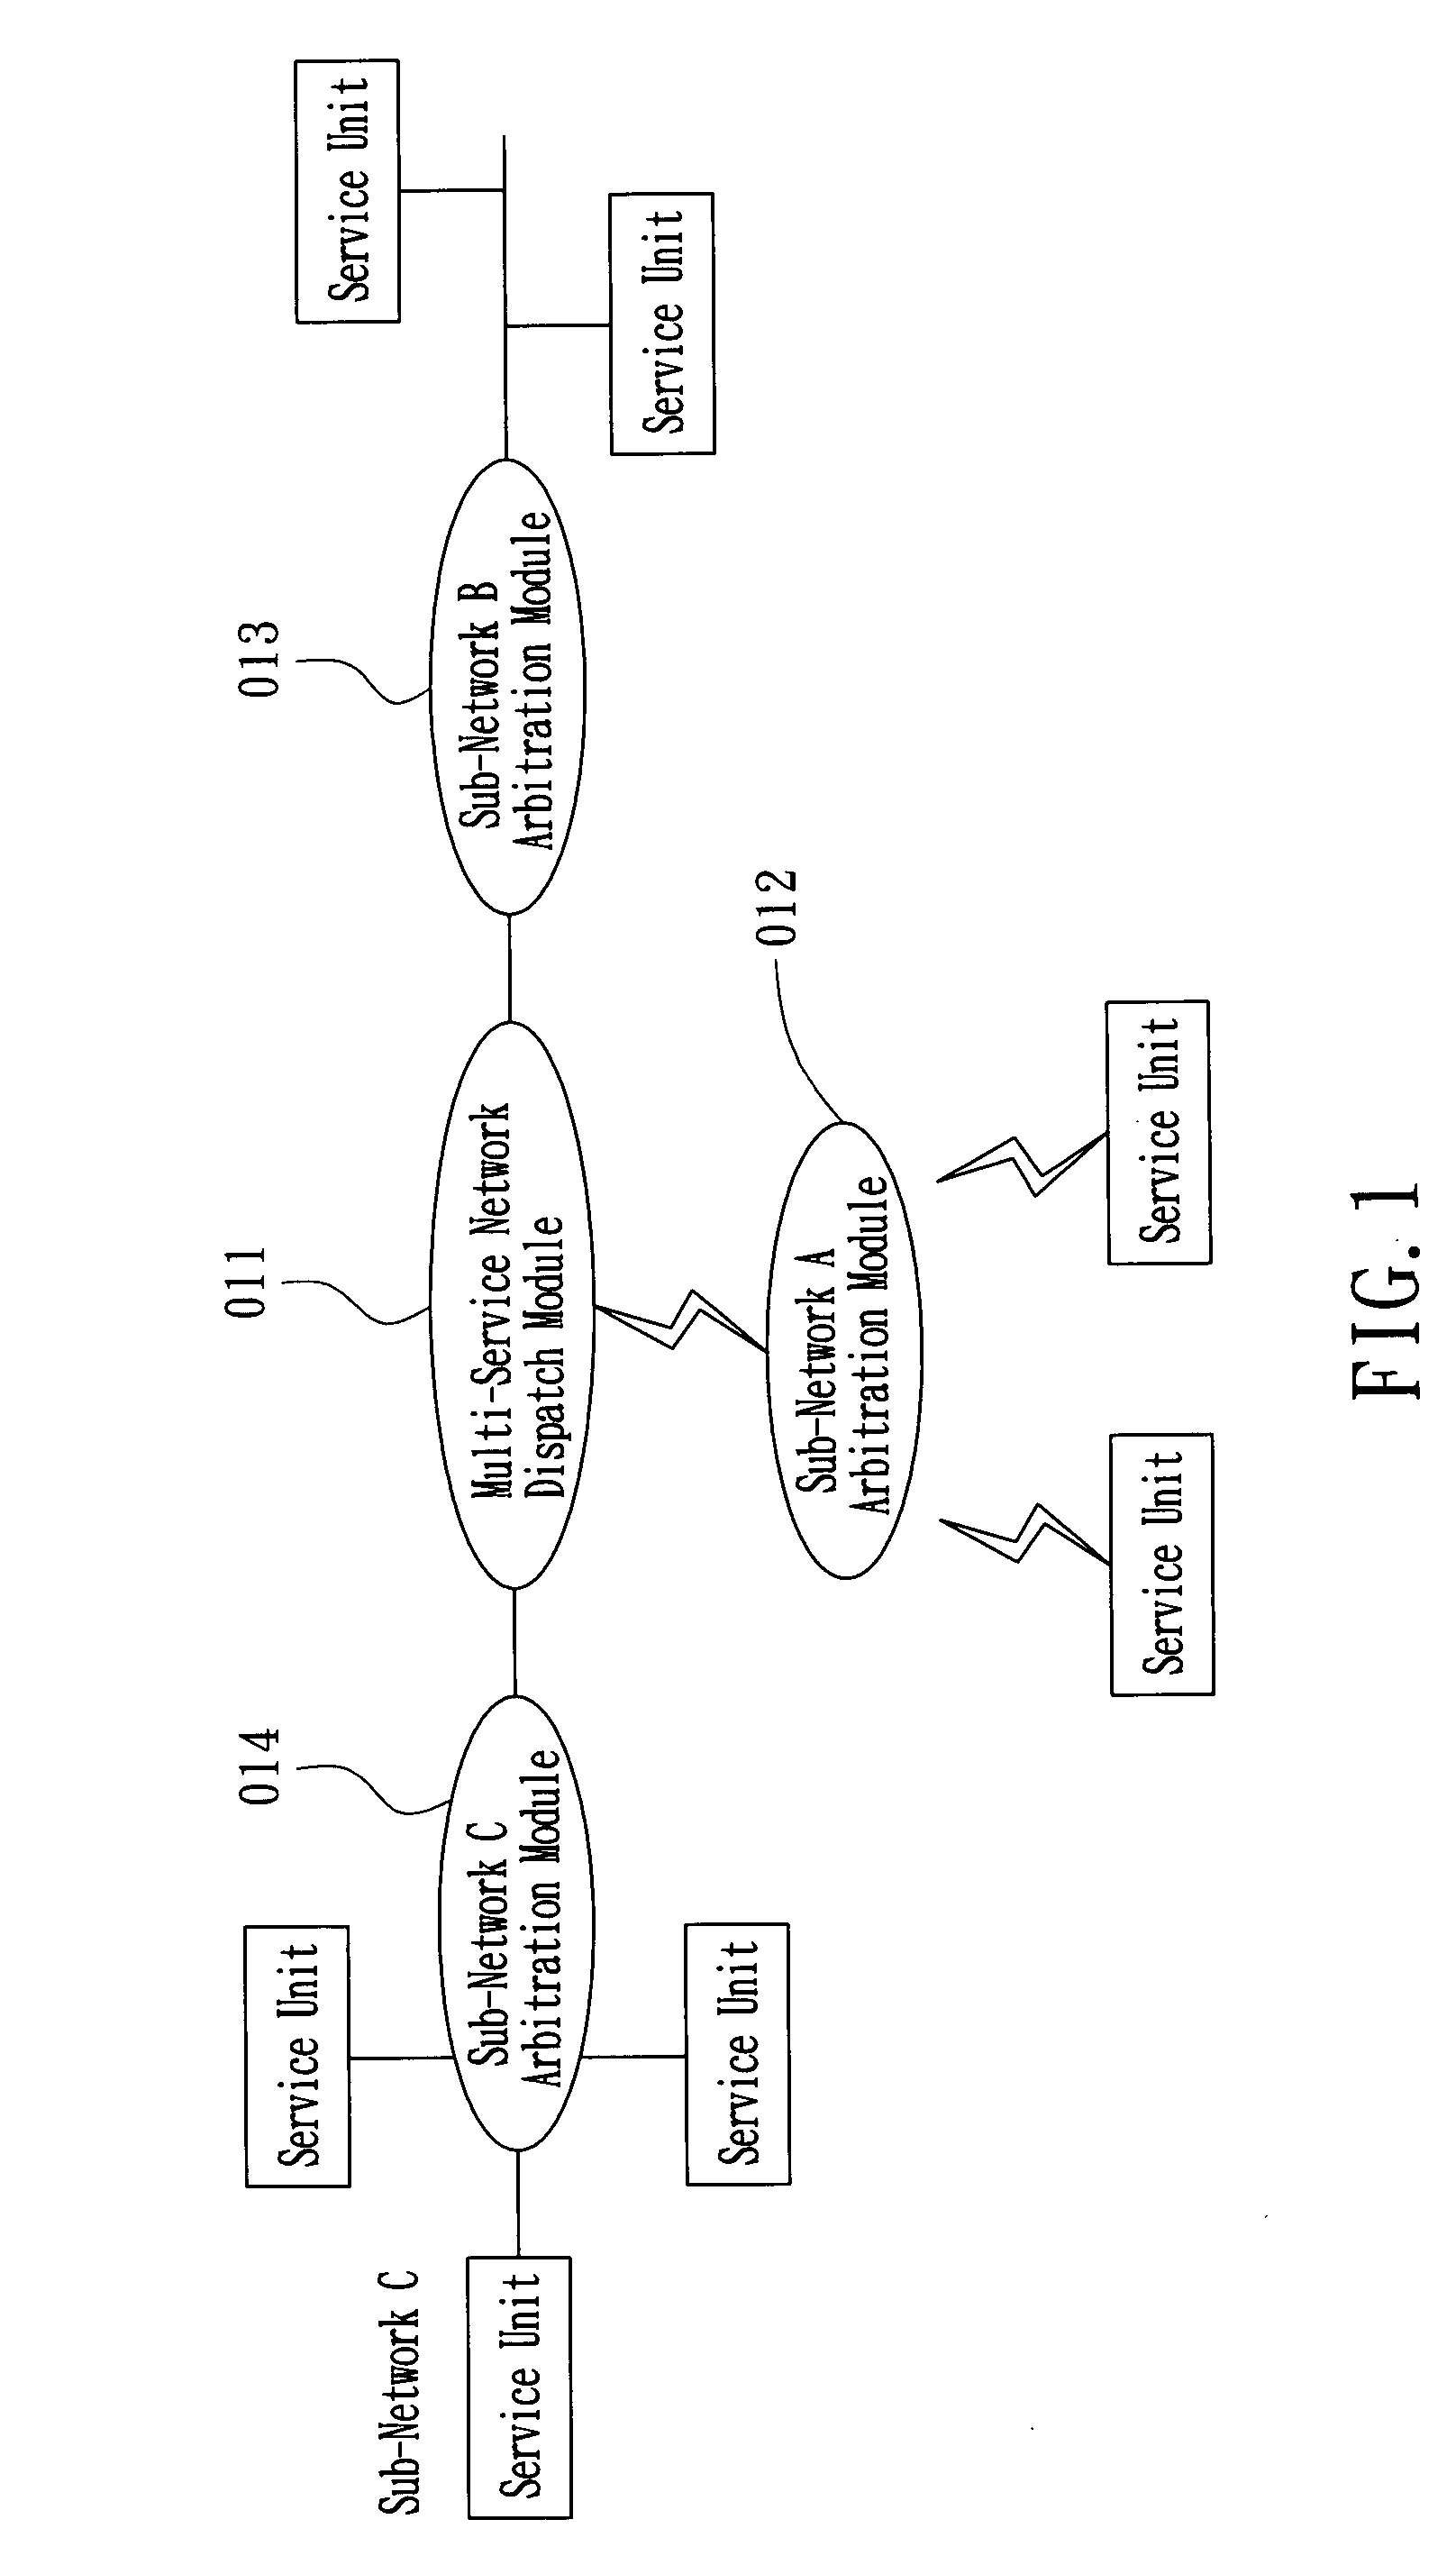 Multiple service method and device over heterogenous networks